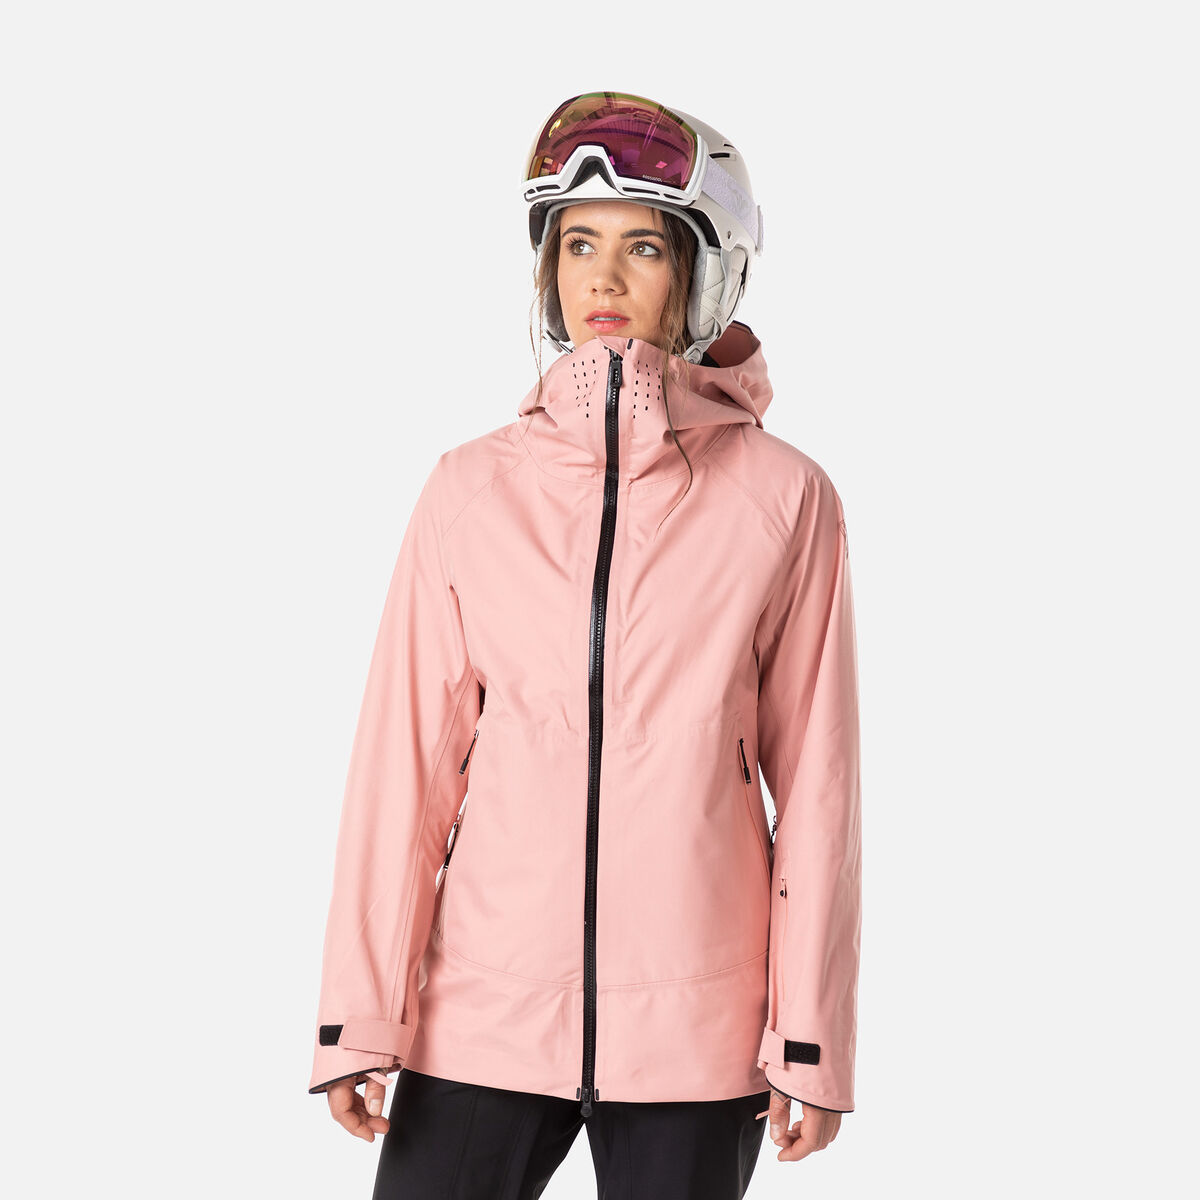 Women's Pink Jackets, Explore our New Arrivals